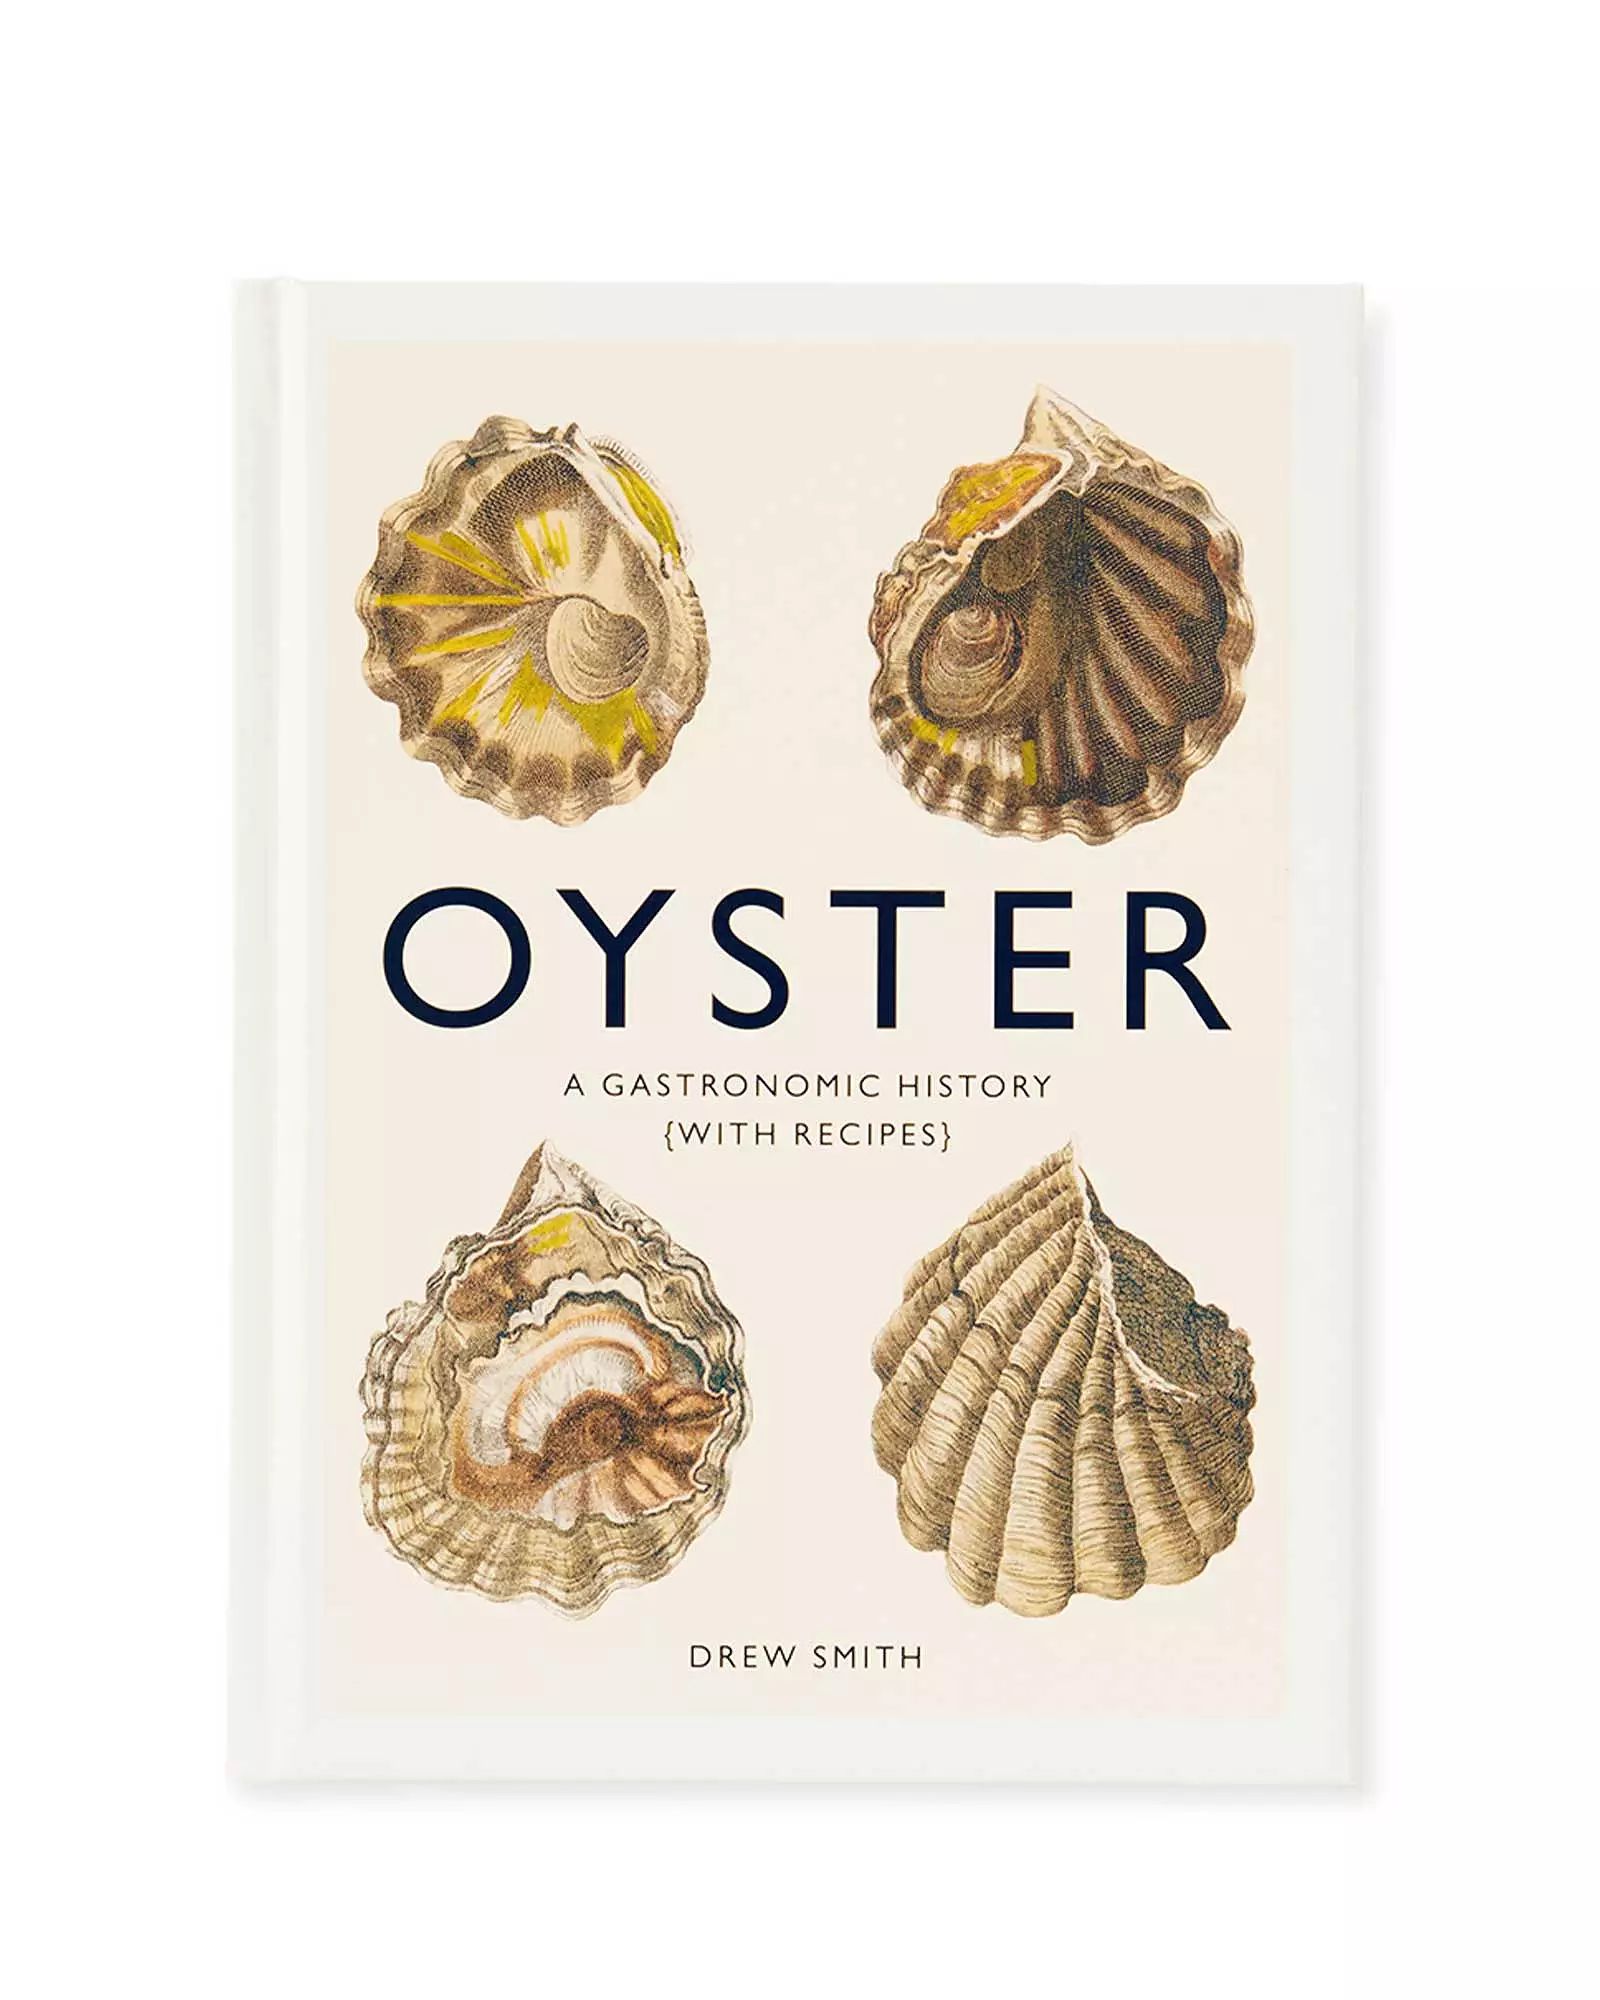 "Oyster: A Gastronomic History" by Drew Smith | Serena and Lily